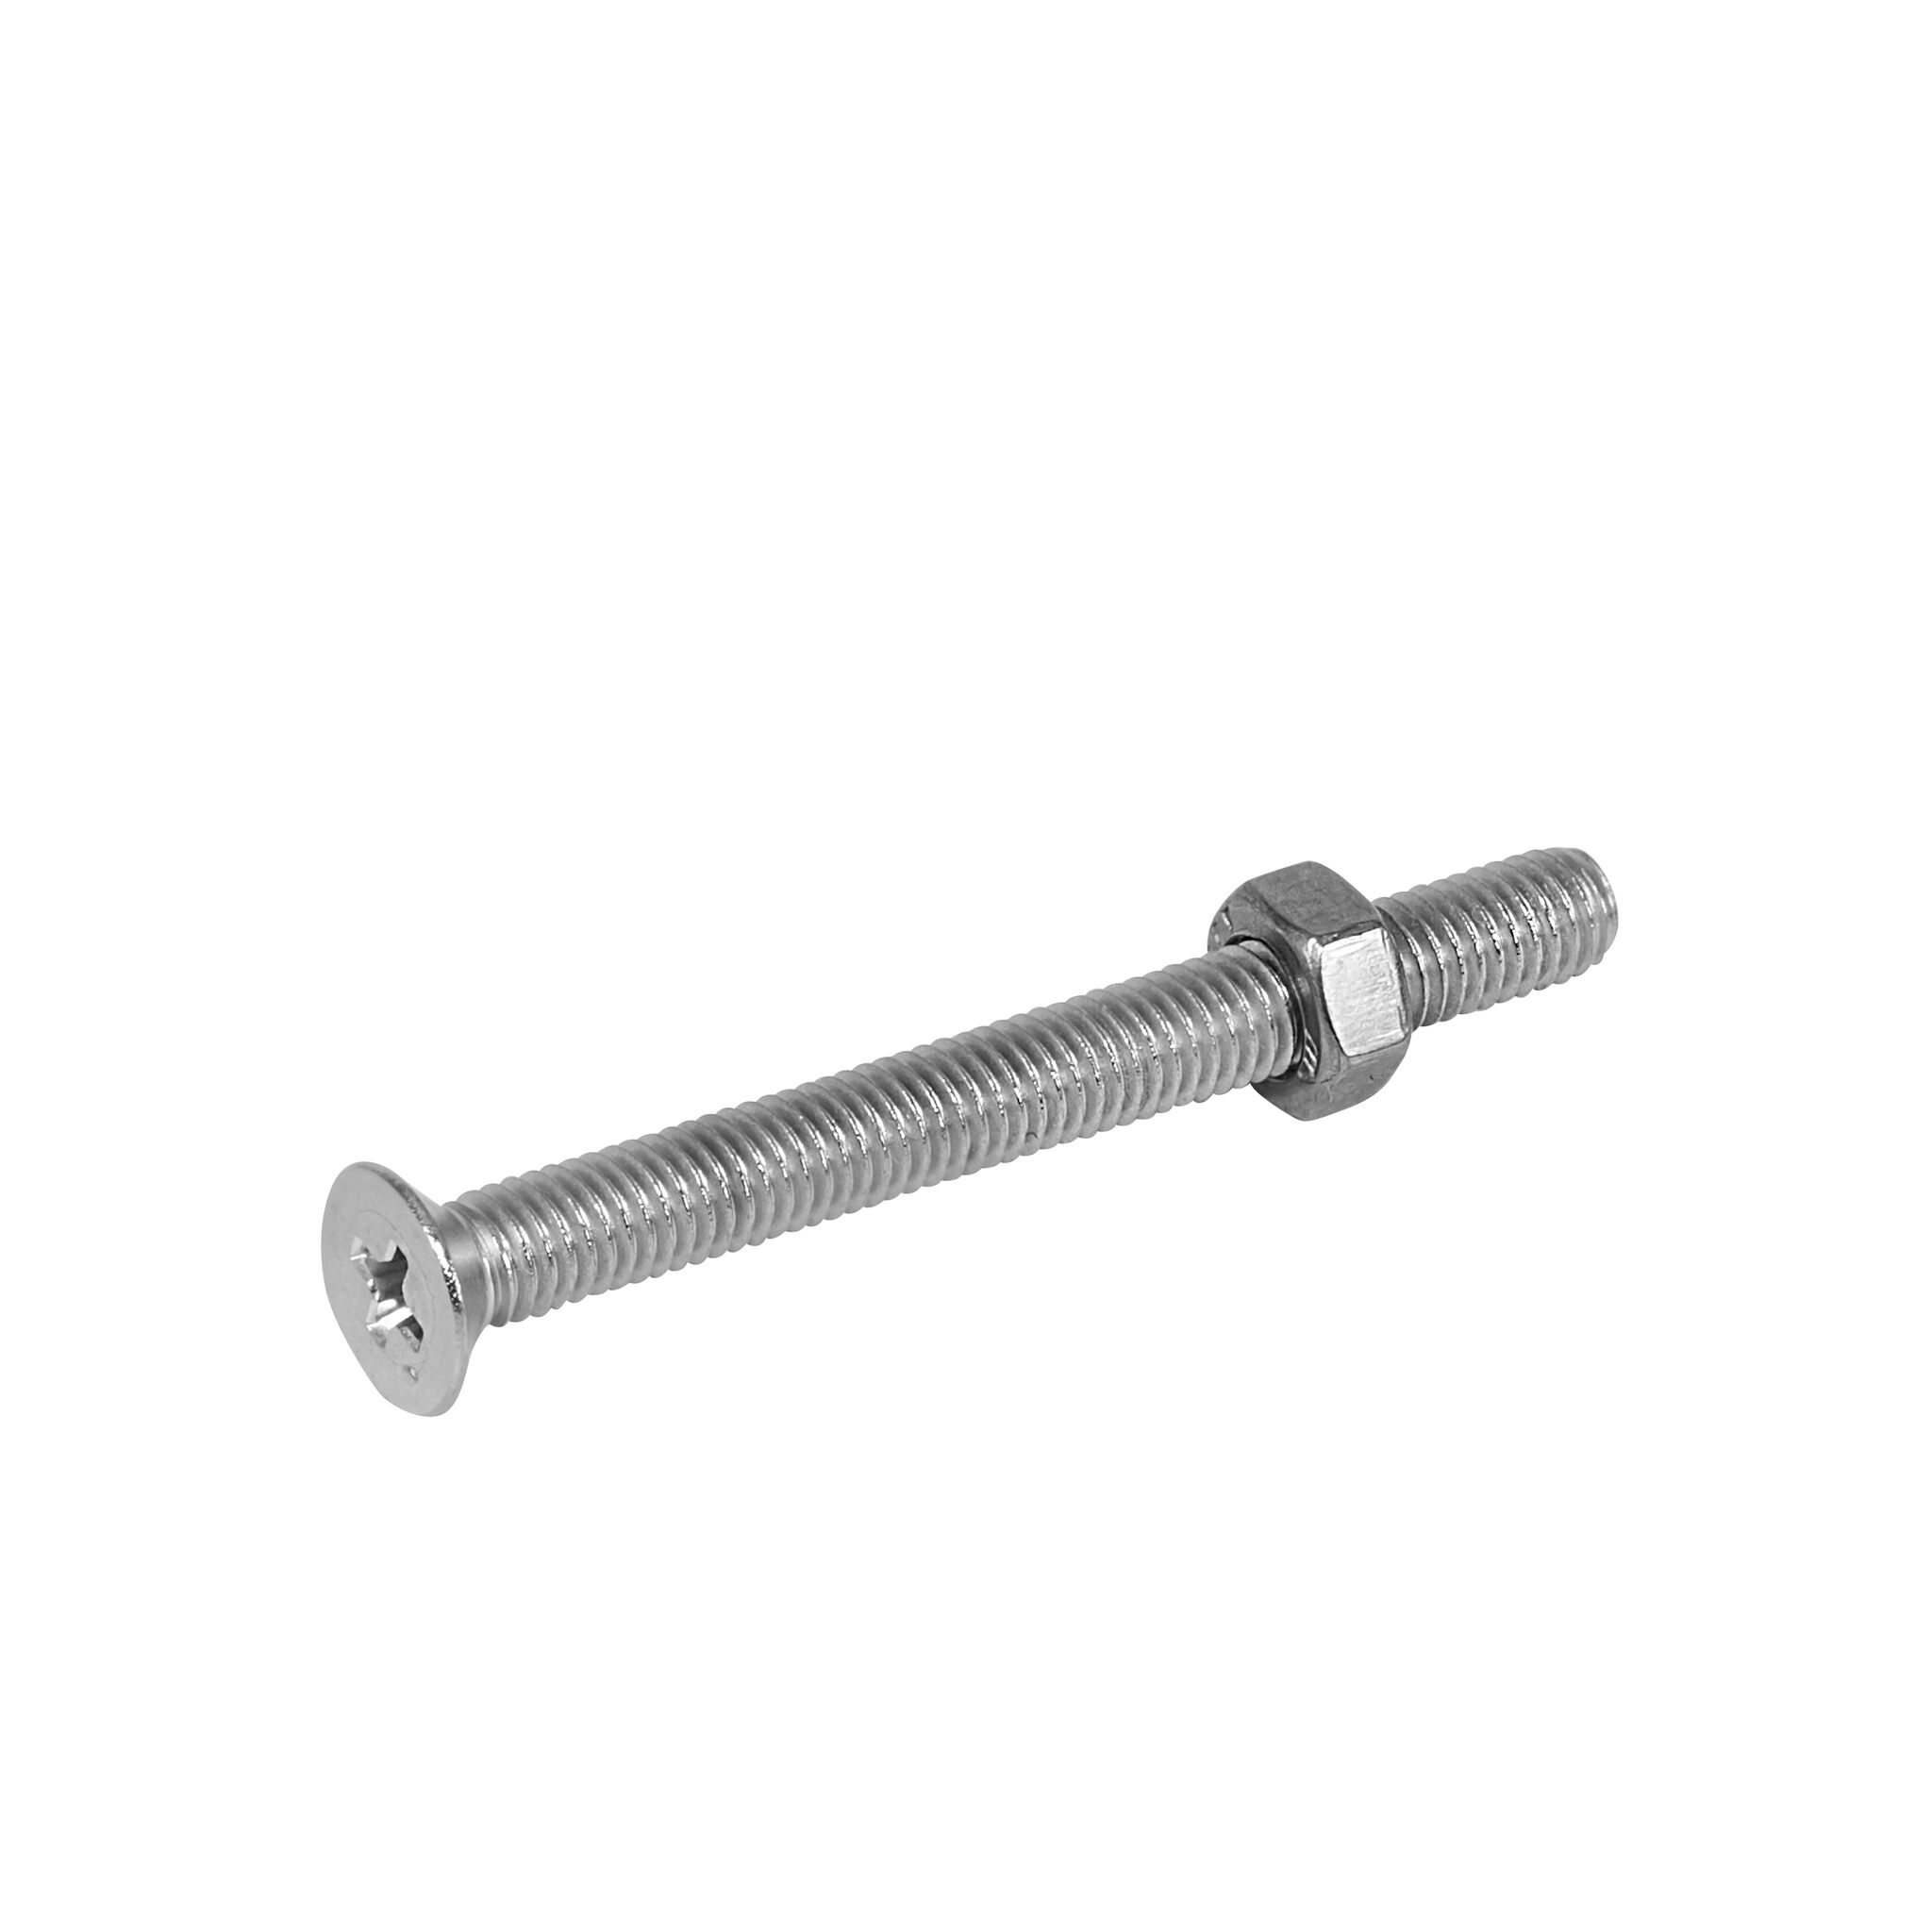 Countersunk bolt with nut (DIN 965/934-A4)